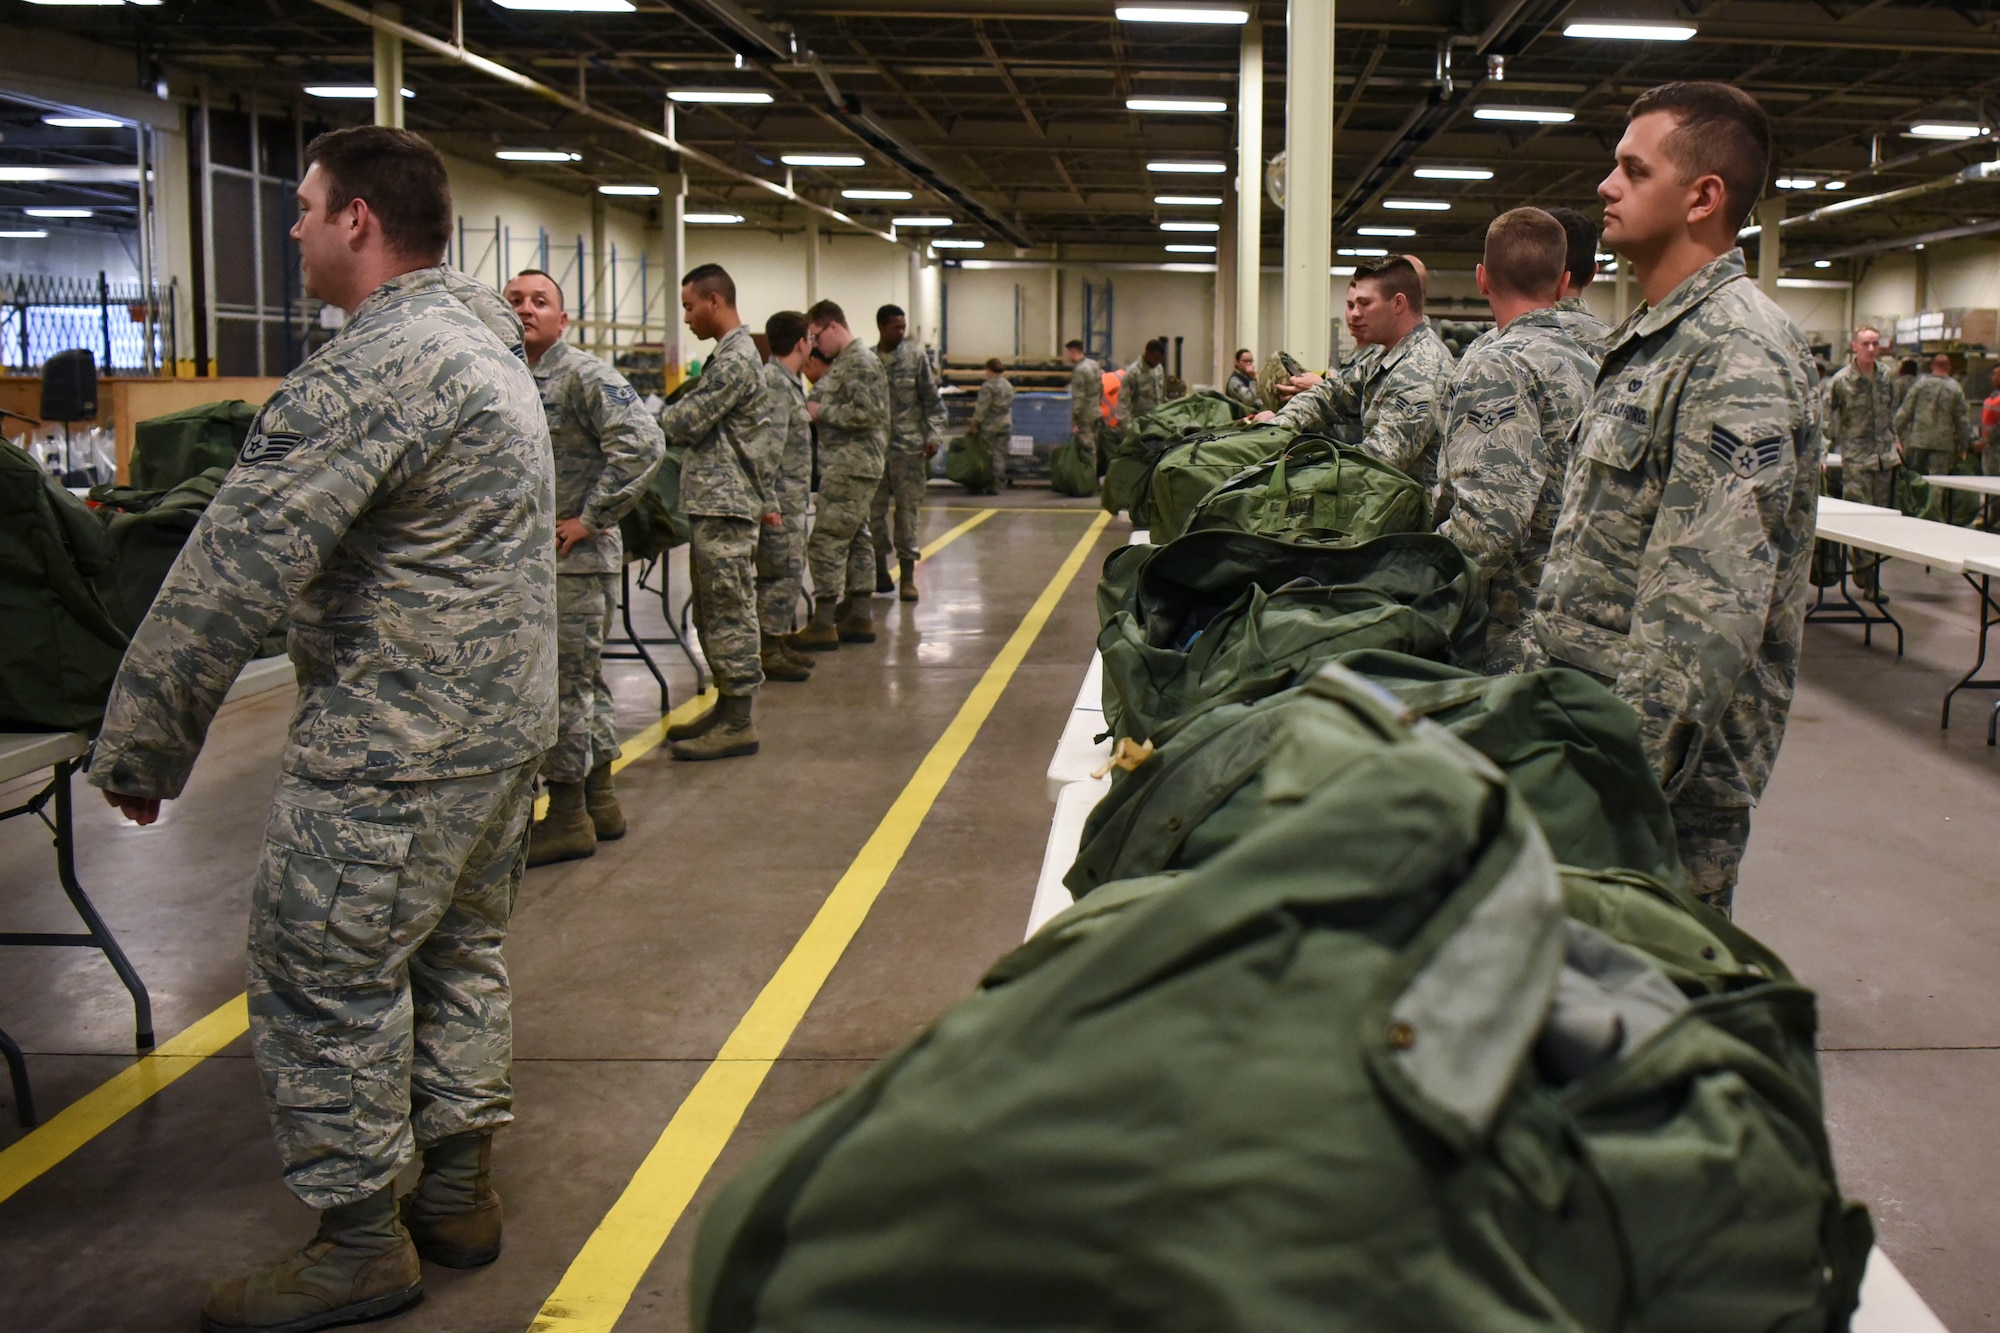 Airmen prepare for a readiness exercise June 14, 2018, on Grand Forks Air Force Base, North Dakota. In this preparation step, Airmen were instructed to ensure they had the proper equipment in their bags for the exercise. (U.S. Air Force photo by Airman 1st Class Melody K. Wolff)